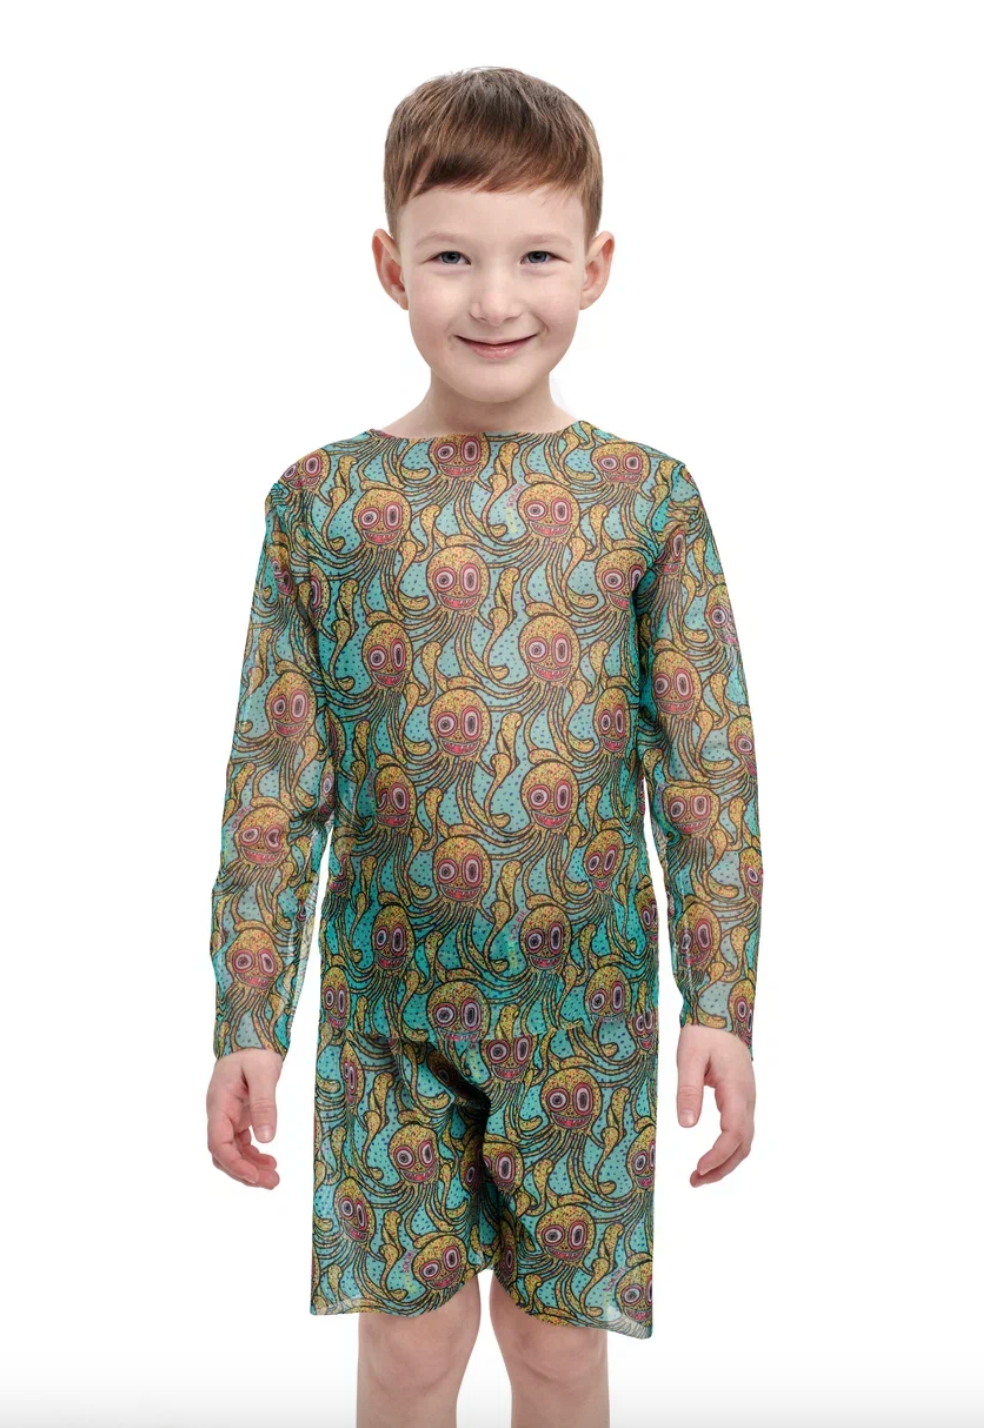 This file contains a description of a tan-through, innovative, sustainable kid's T-shirt and shorts set with an Octopus print. It offers classic luxury for modest fashion. Shop now!